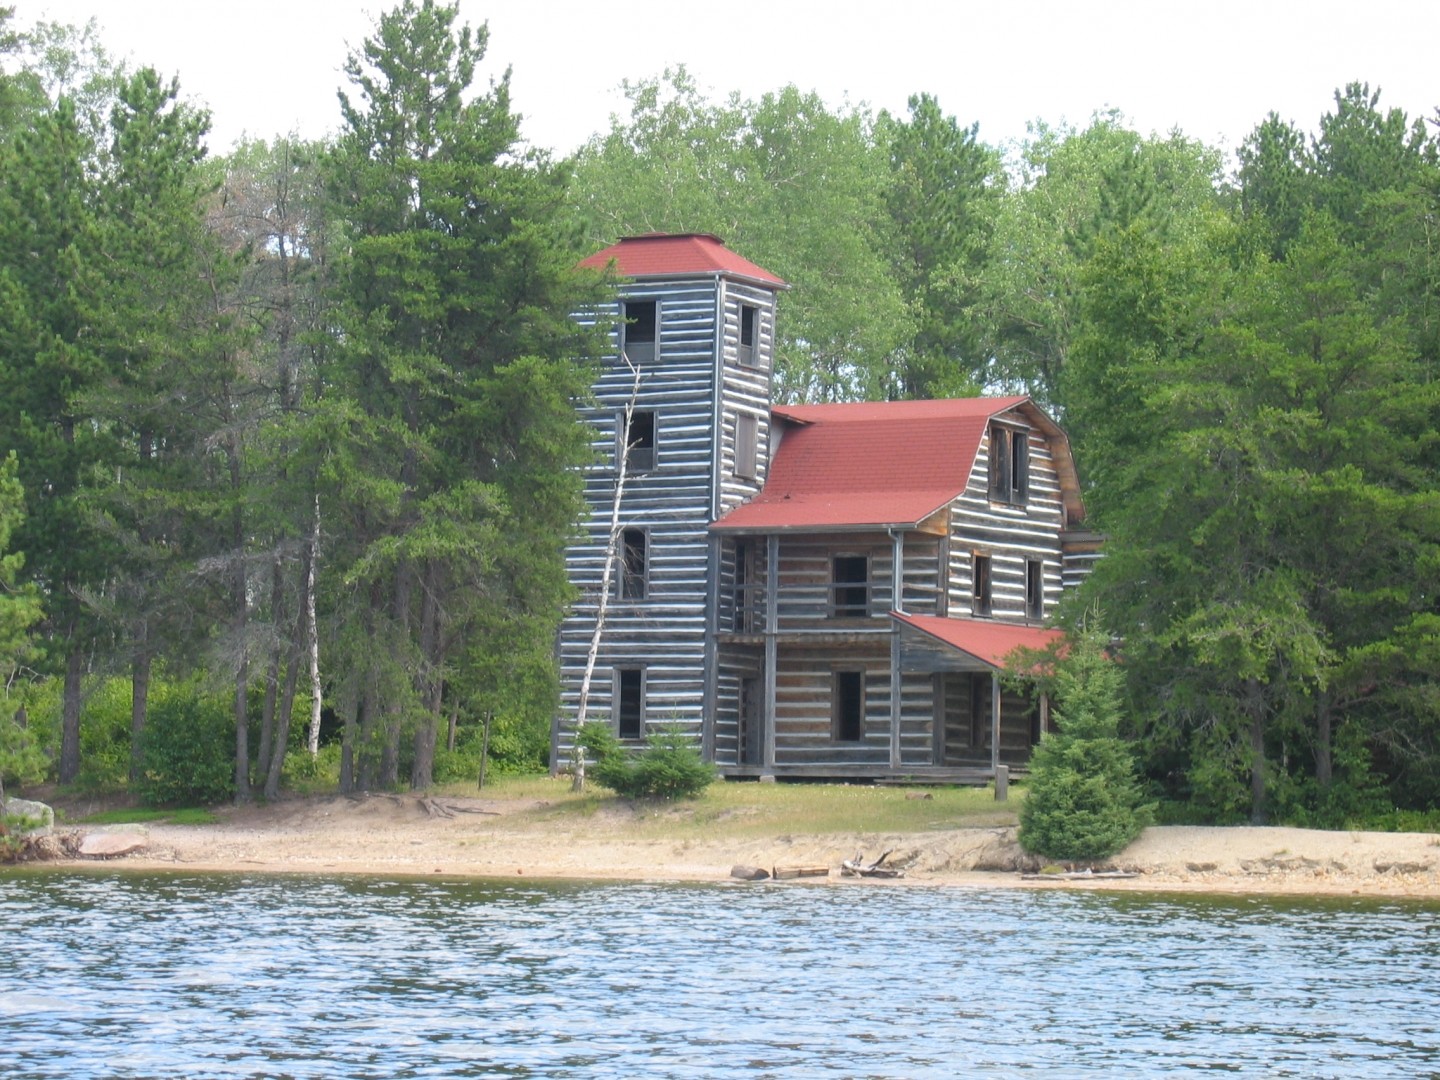 Log structure on shore of a lake with a tall tower